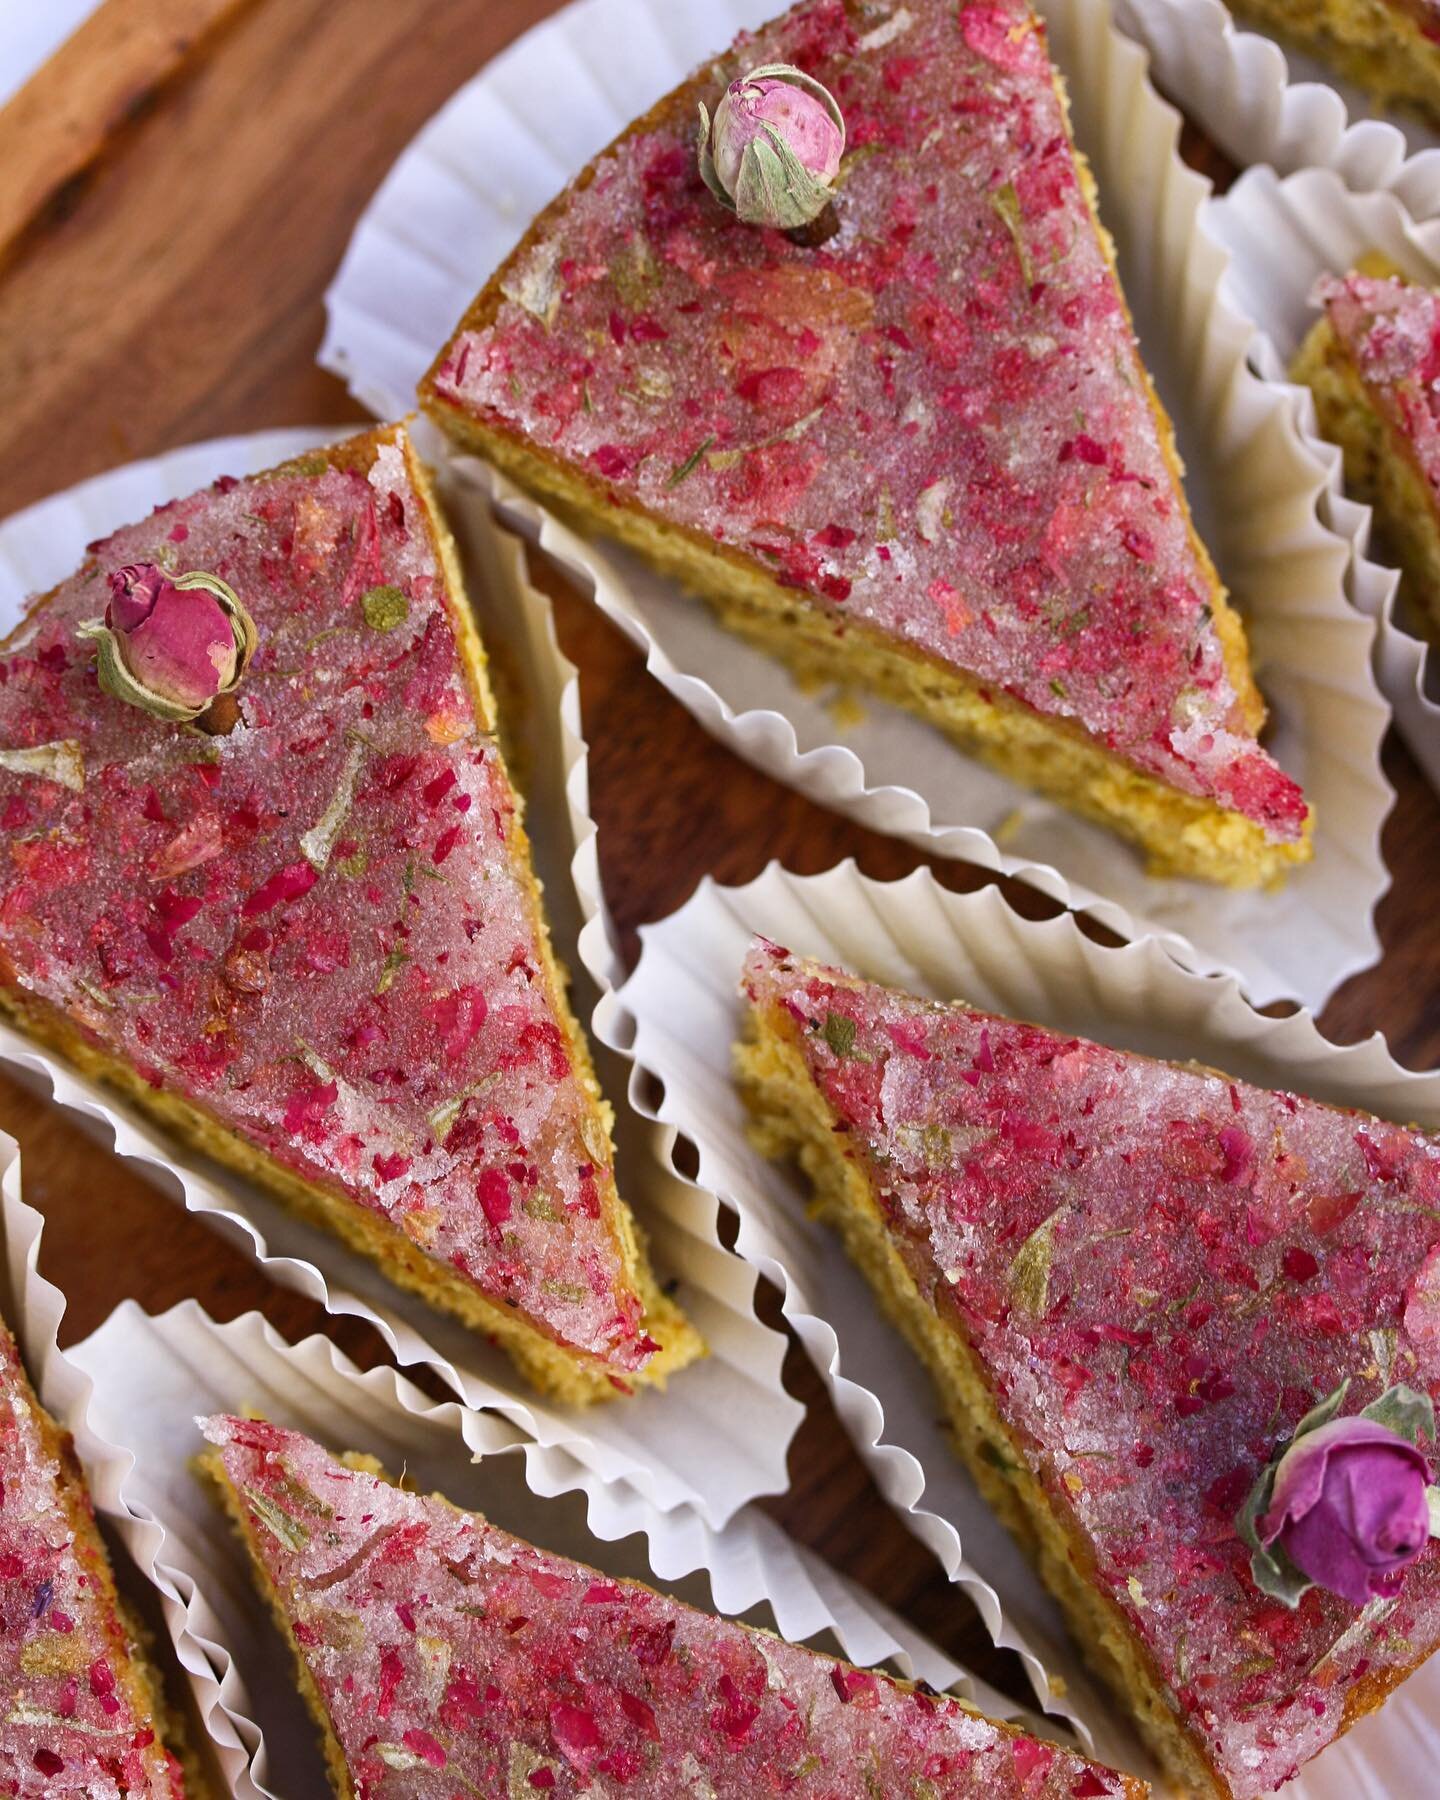 Vegan mango and pistachio cakes with a pretty rose petal and lemon drizzle 🌱🥭🍋🌹The mango pur&eacute;e substitutes the eggs quite well in this recipe. The original recipe I used as a base called for vegan yogurt which also works well, however I wa